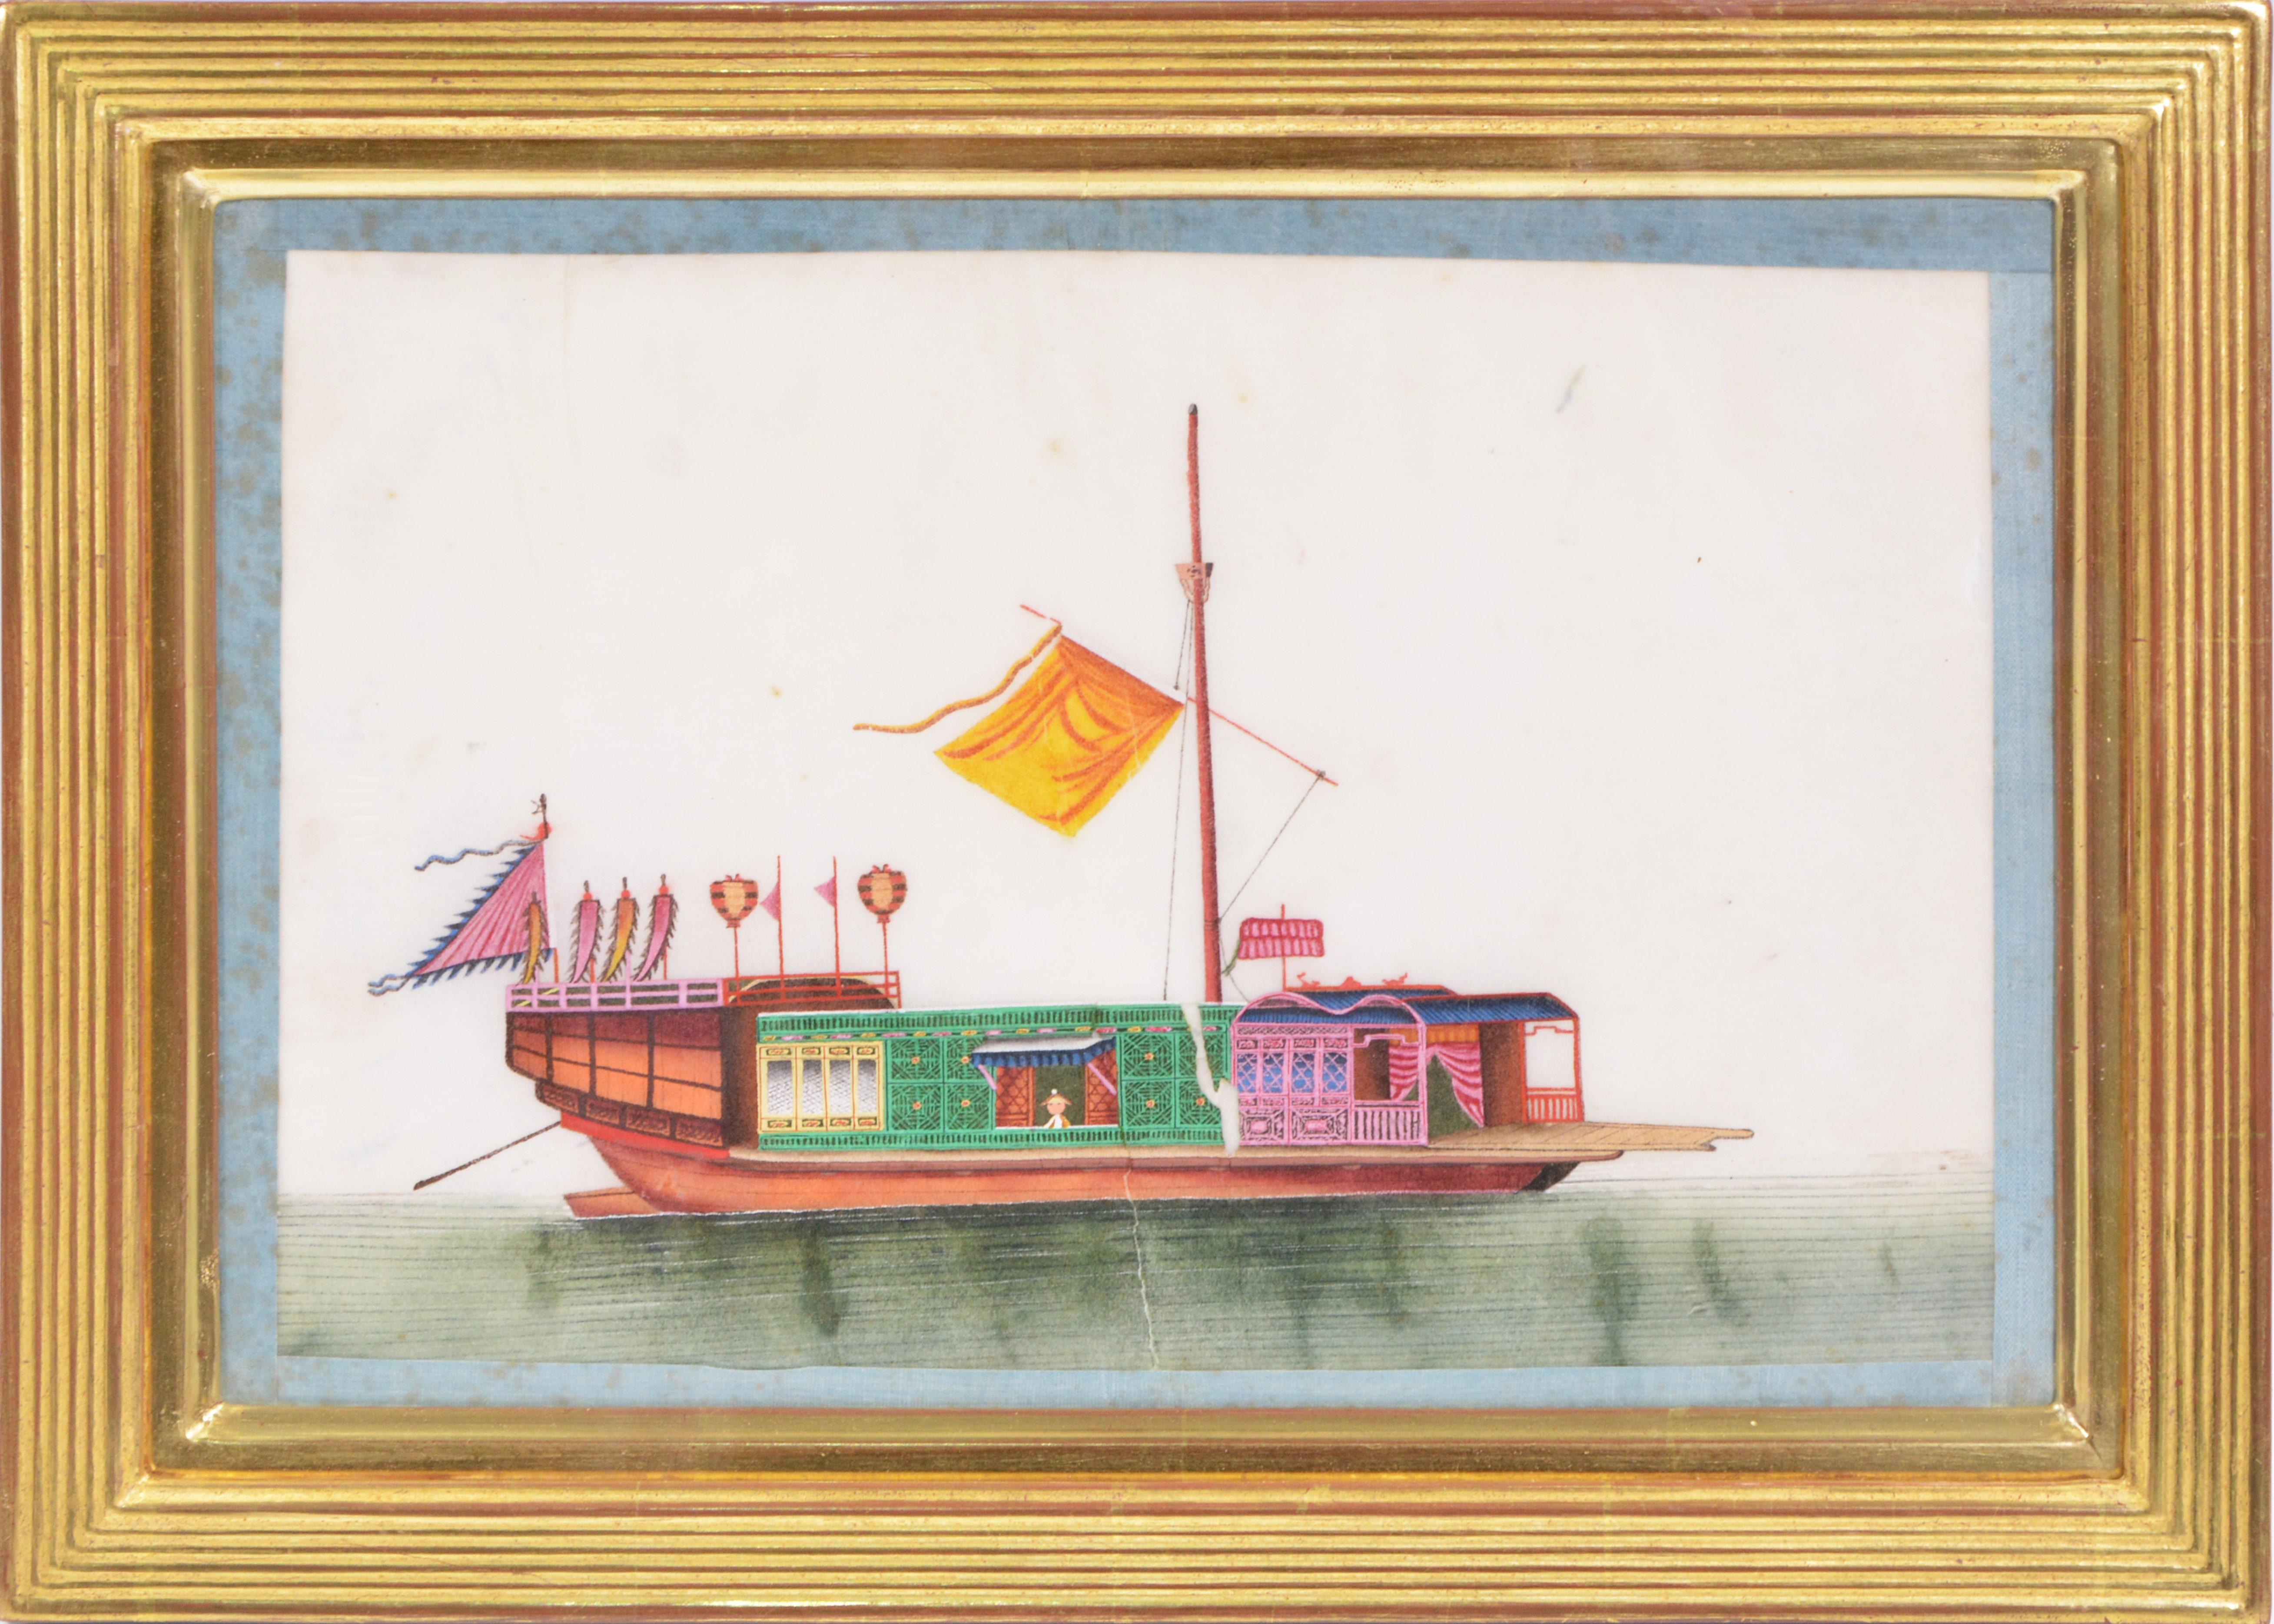 A Group of Twelve Chinese Junks and Barges. - Print by Unknown